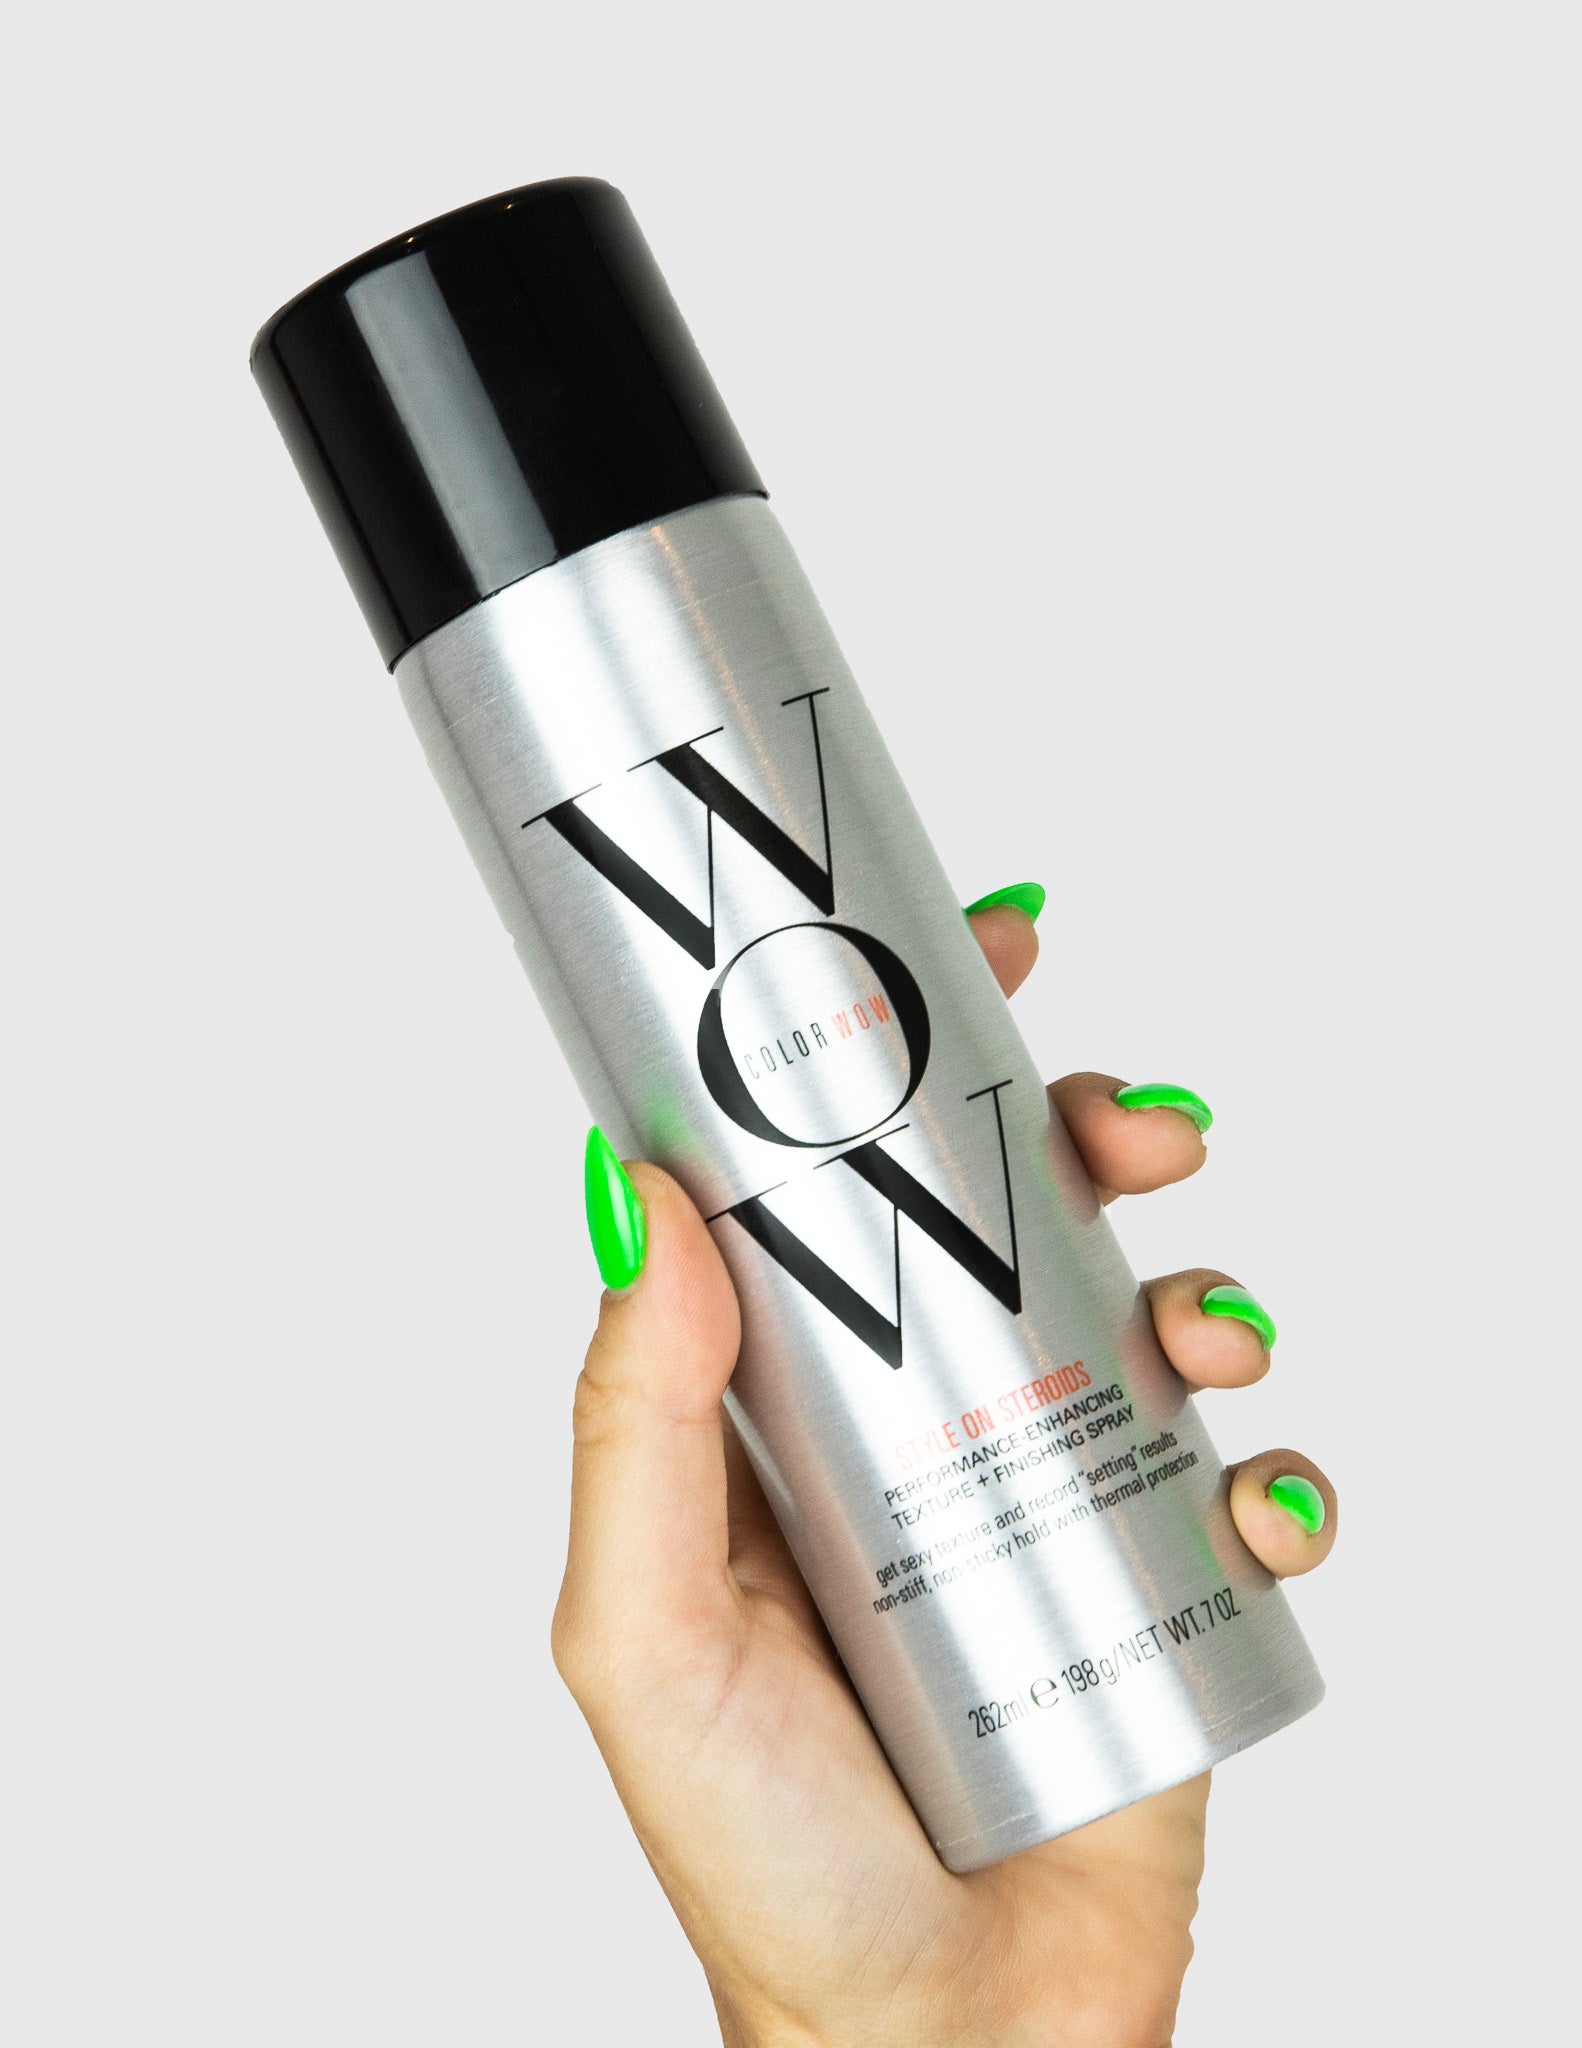 Color Wow Style on Steroids Texture Finishing Spray 262ml